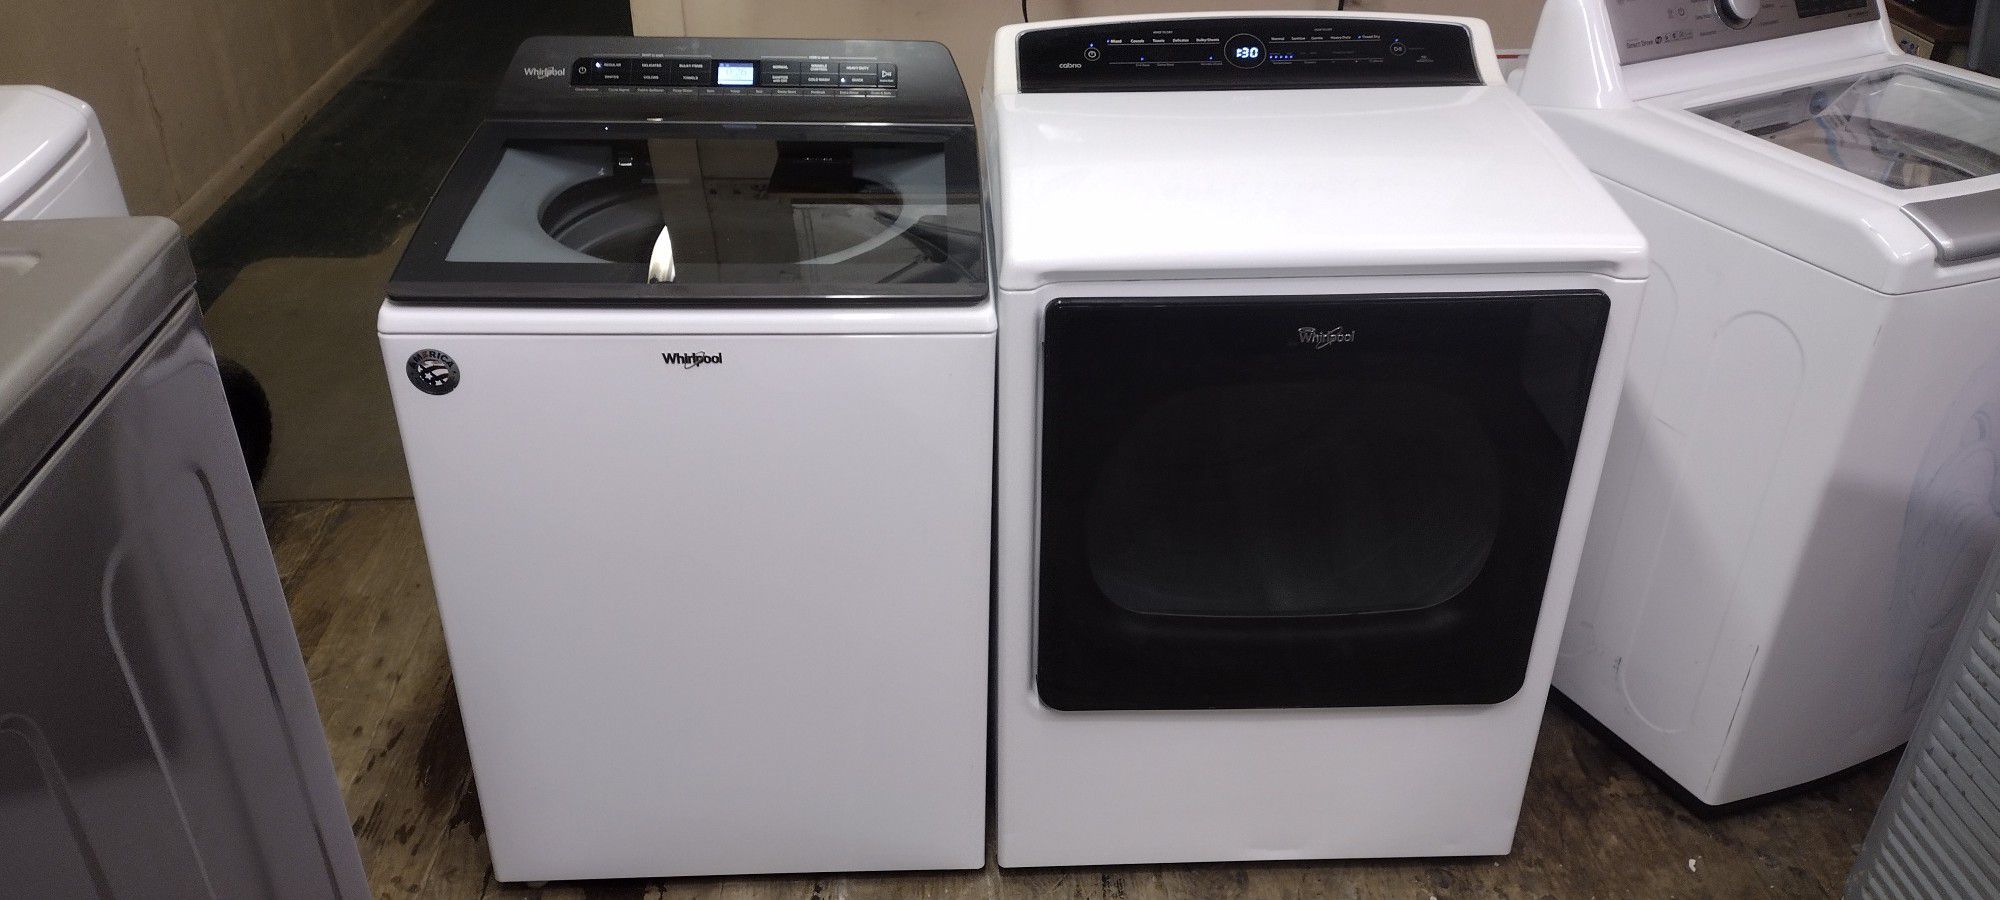 Whirlpool White TopLoad Washer & Cabrio Electric Dryer Set